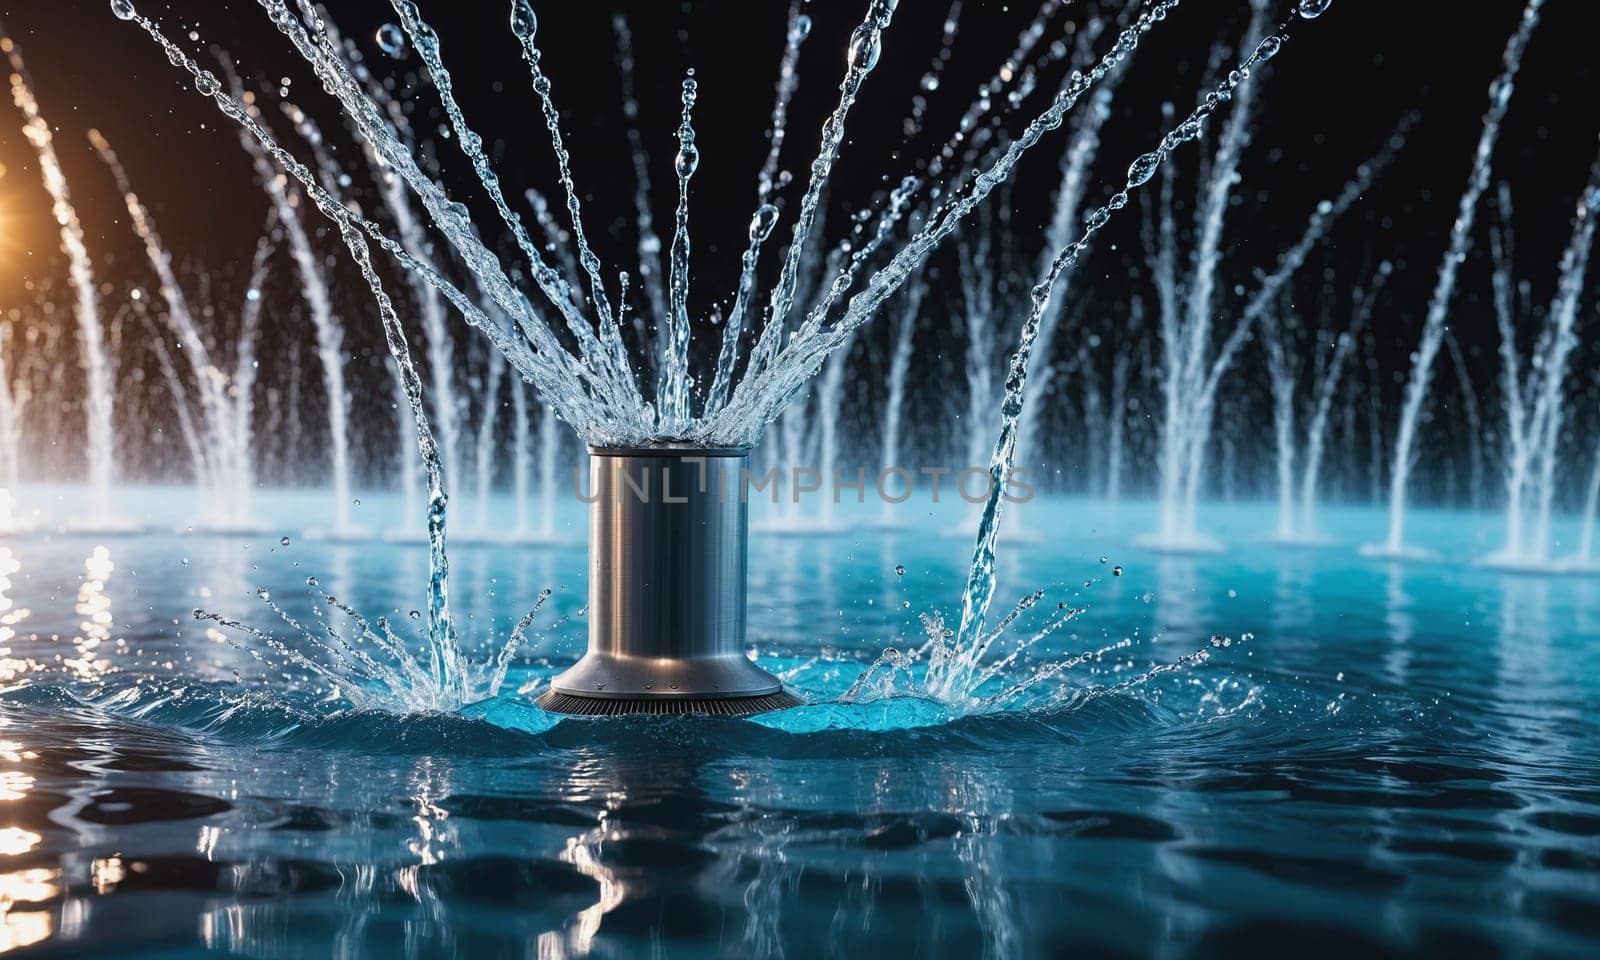 Elegant Water Fountain Display at Night by Andre1ns